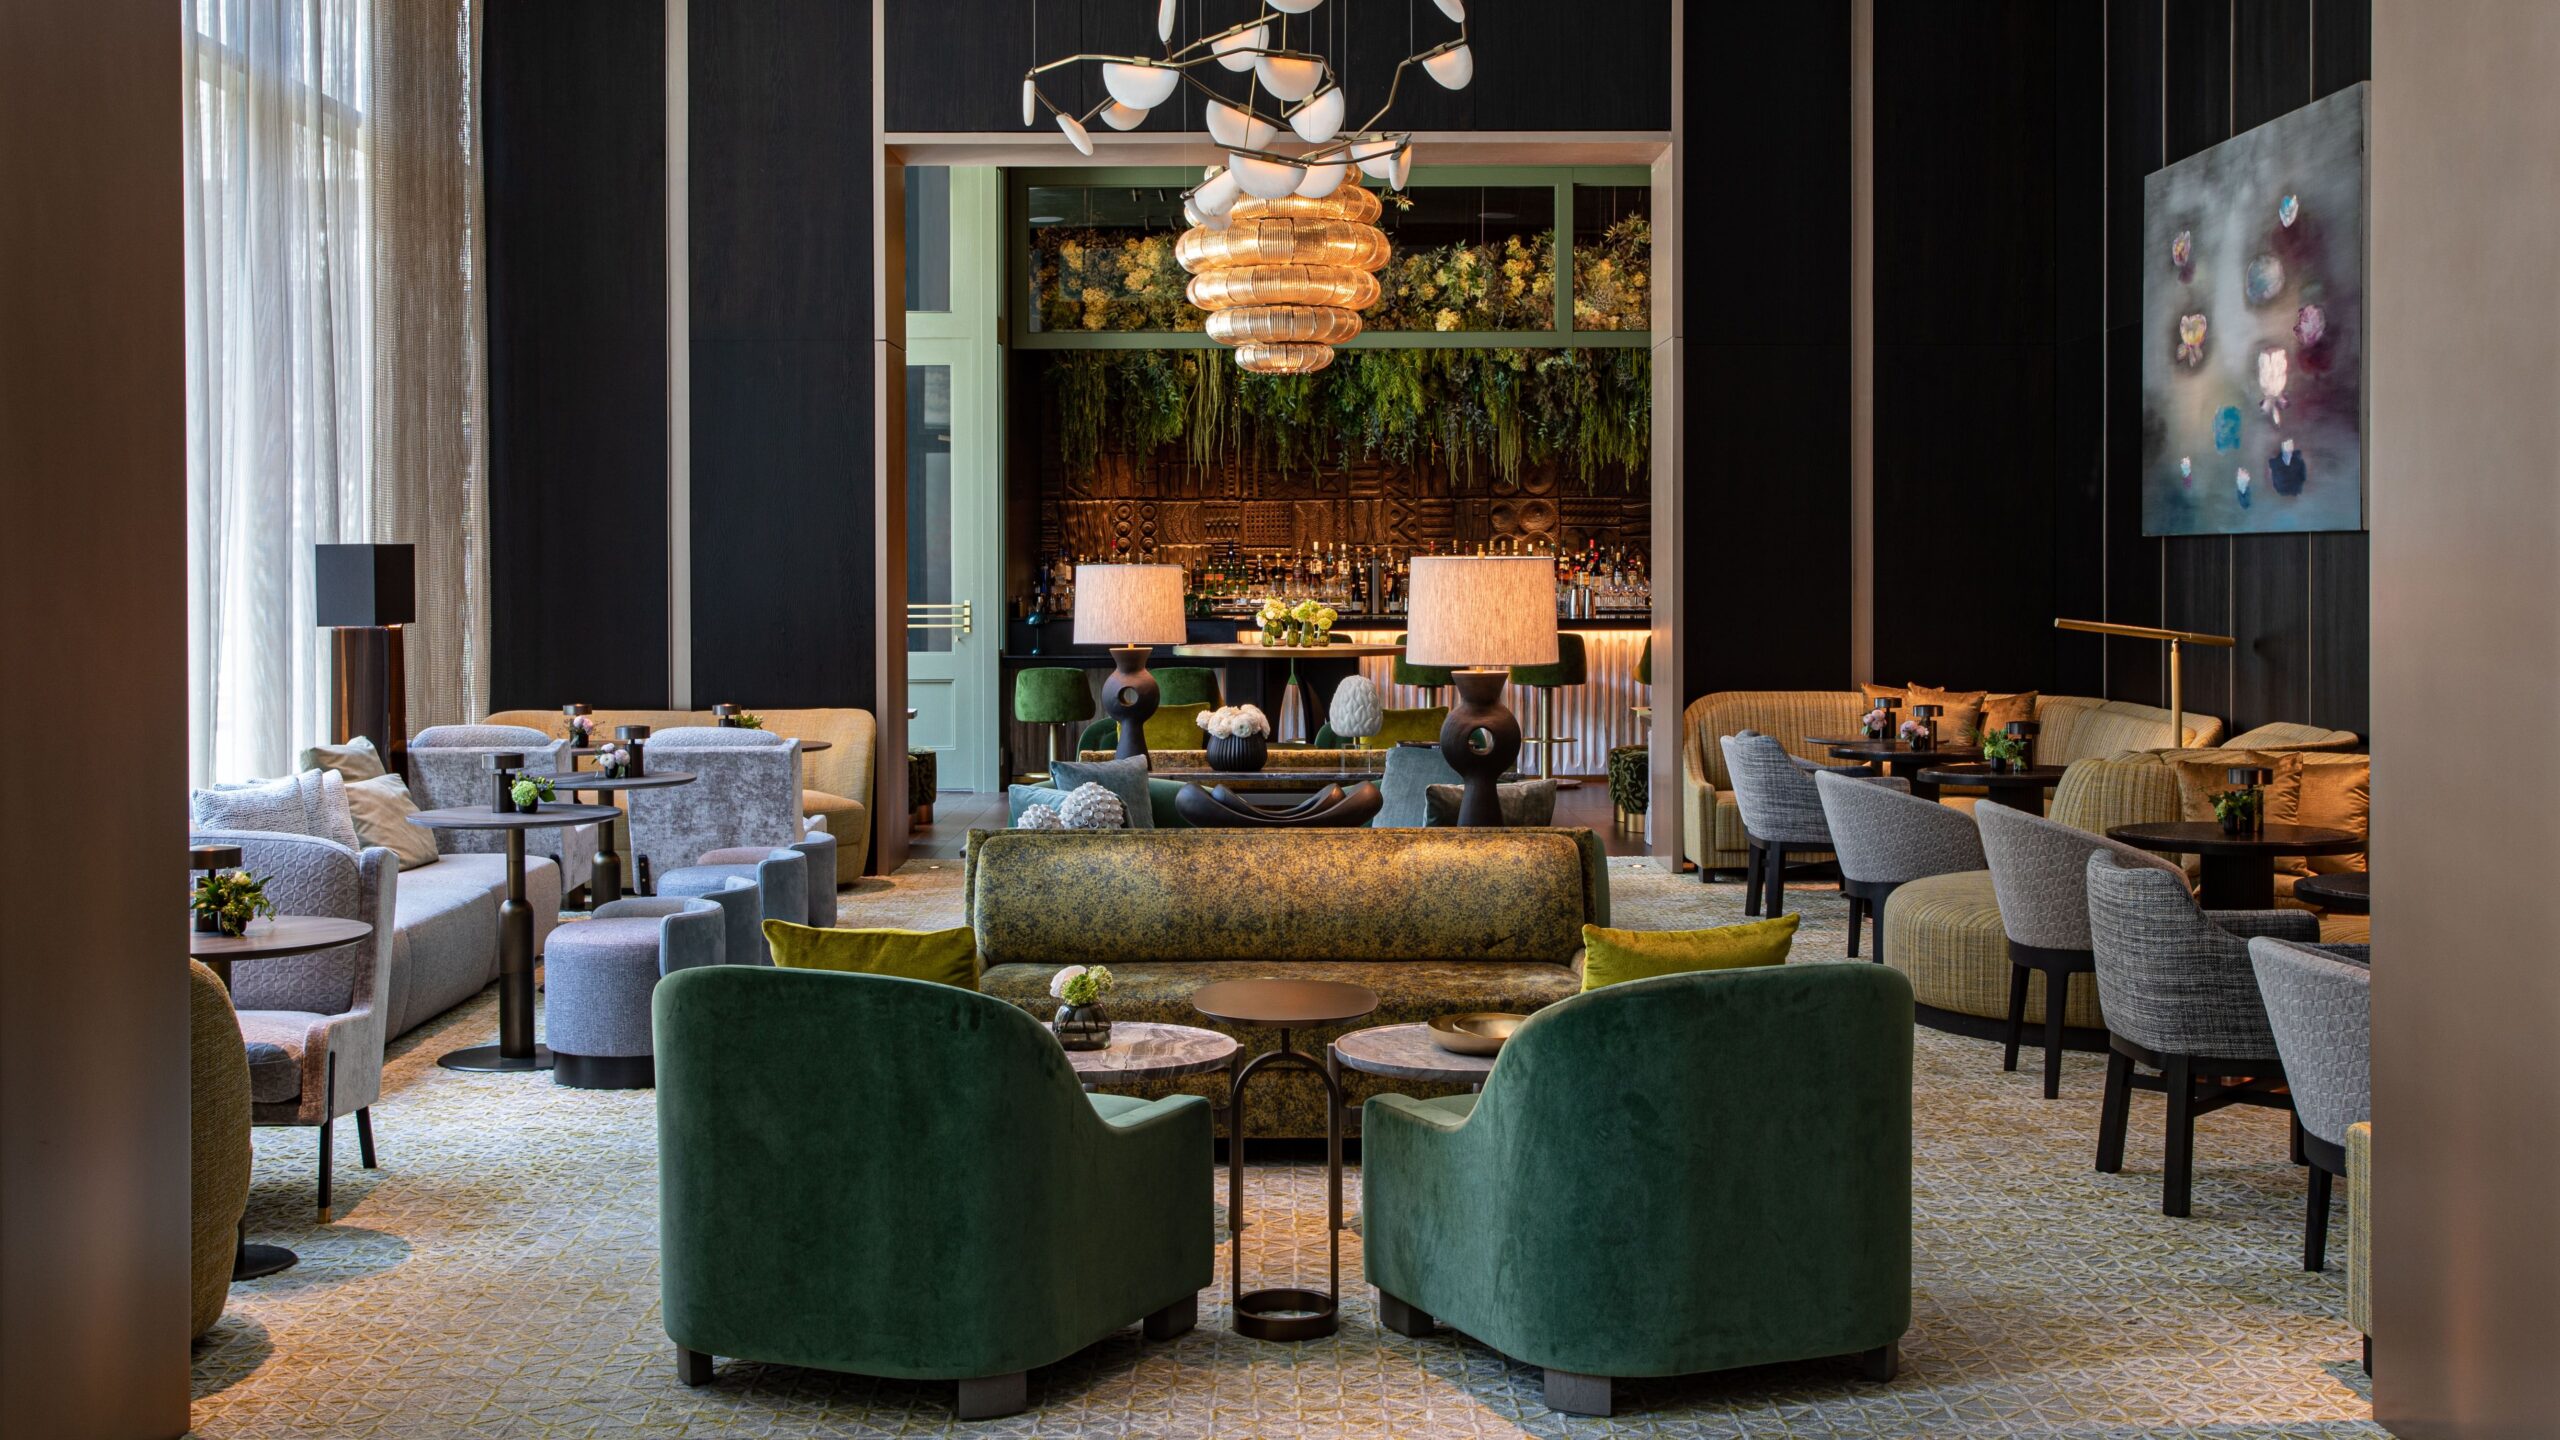 The lobby of The Ritz-Carlton New York, NoMad. The walls and furniture are dark green and black